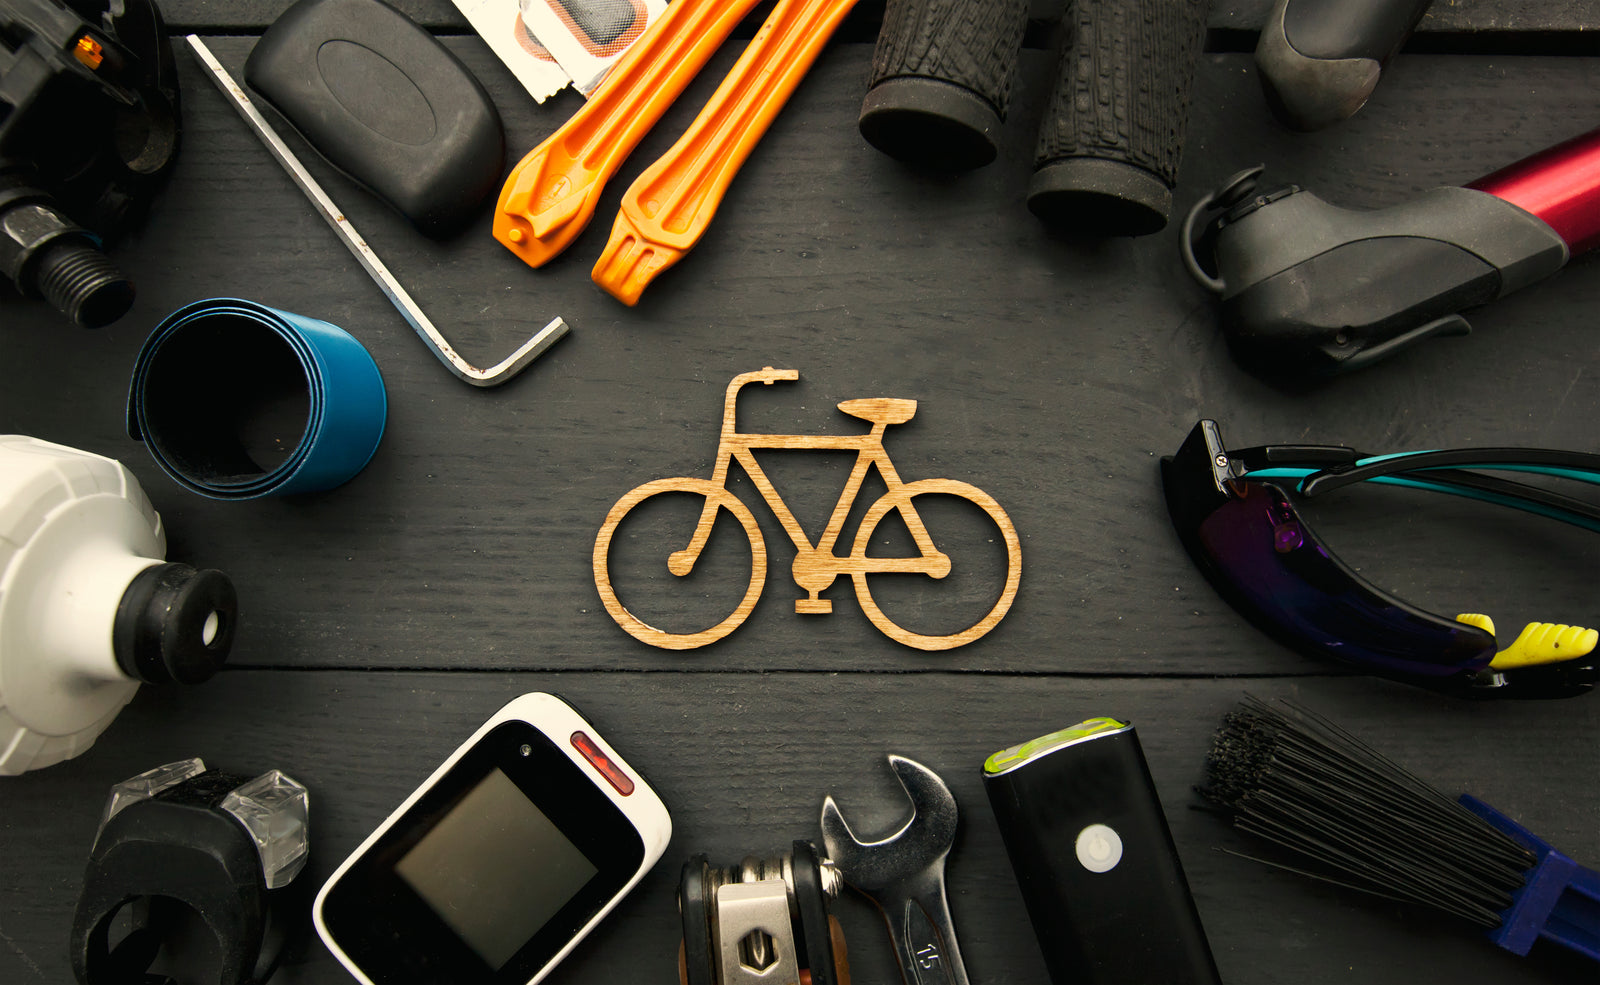 Image of miscellaneous bike parts and accessories